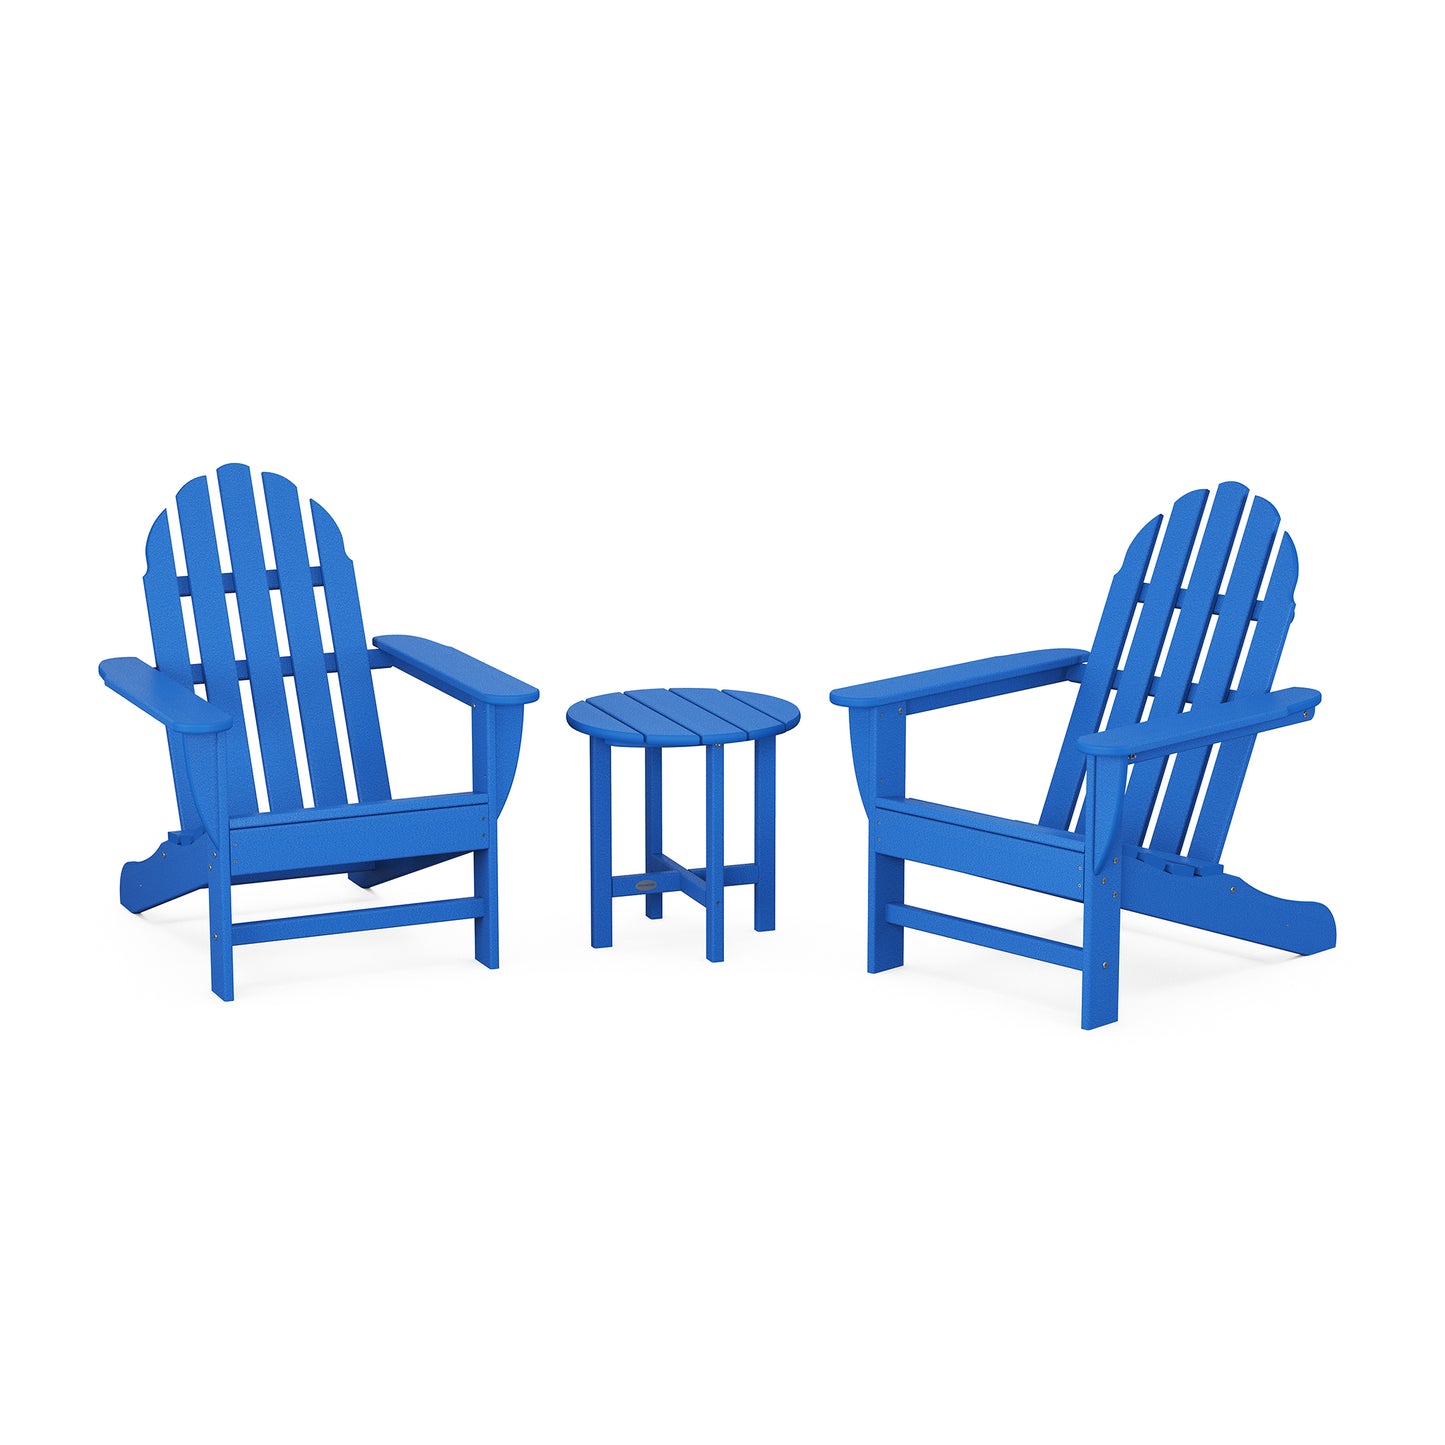 Two blue POLYWOOD Classic Adirondack 3-Piece Set chairs facing each other with a small round table in between them, all positioned on a plain white background.